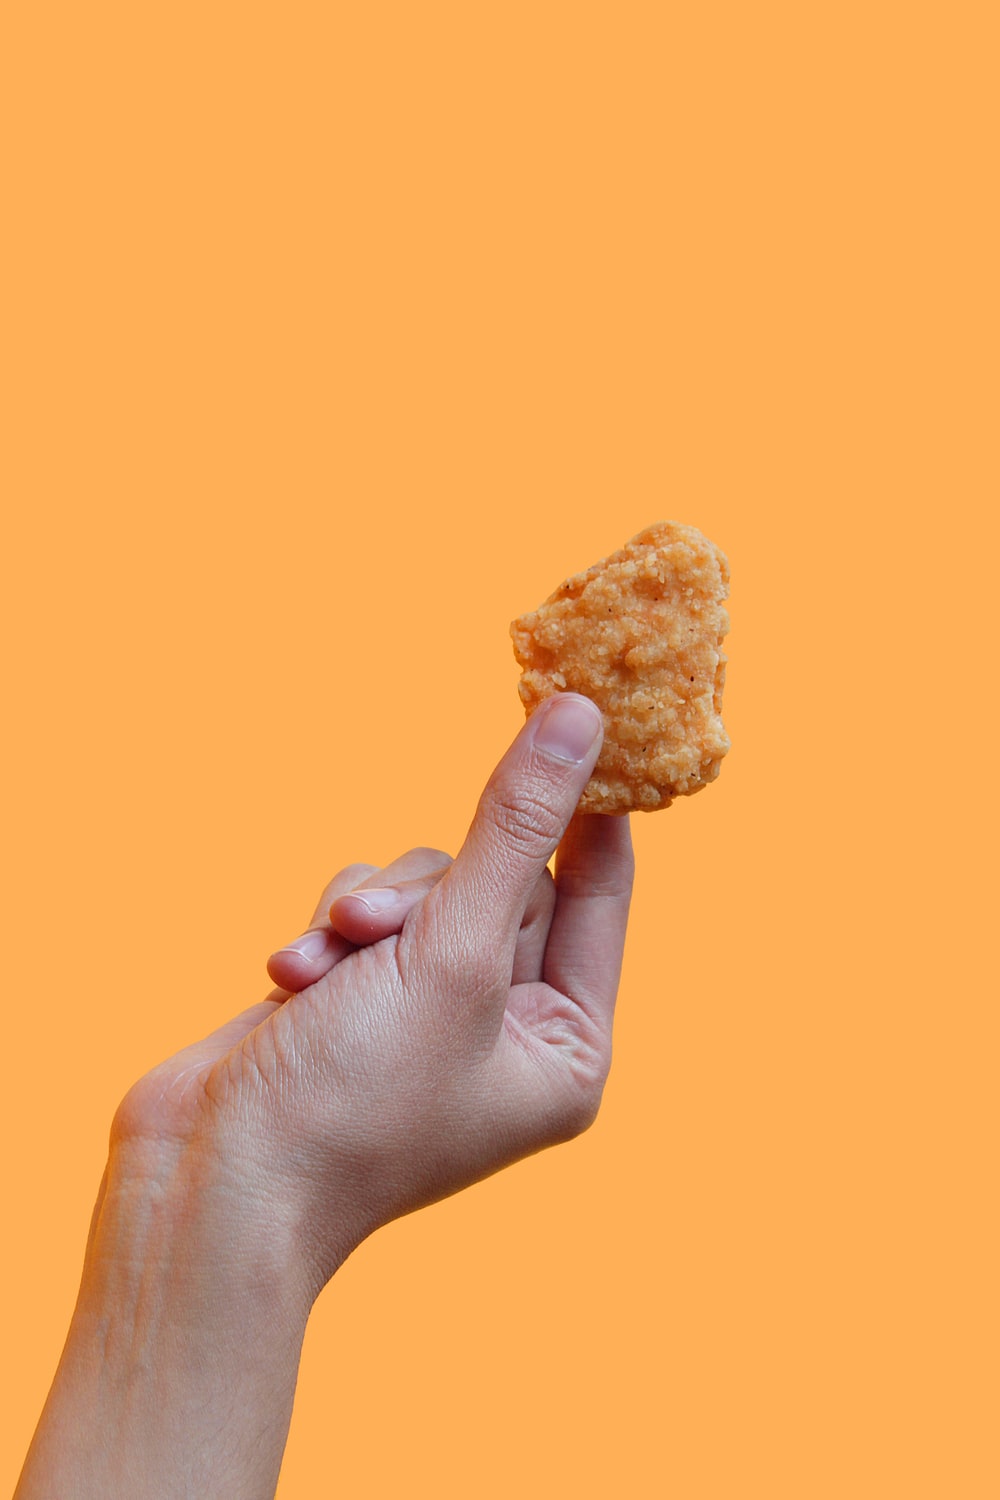 Chicken Nugget Picture. Download Free Image